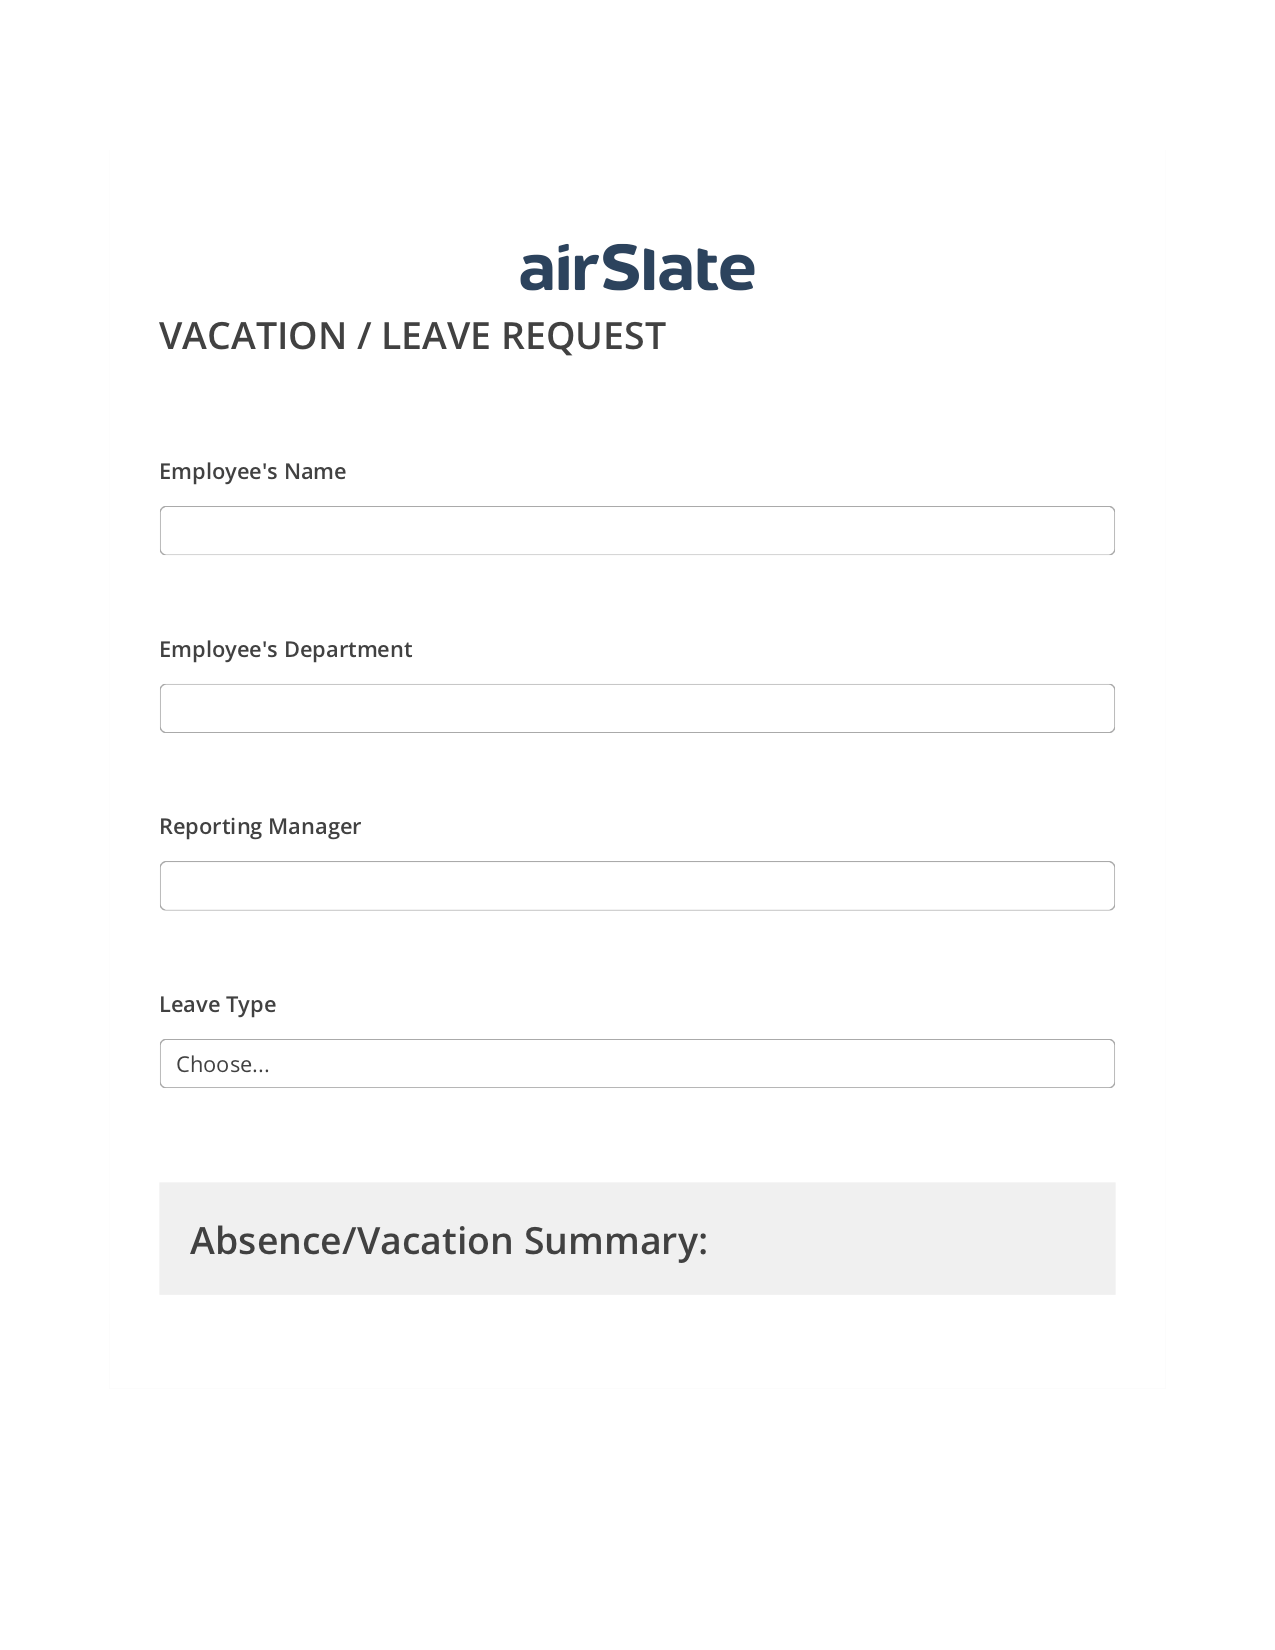 Vacation/Leave Request Flow MS Teams Notification upon Completion Bot